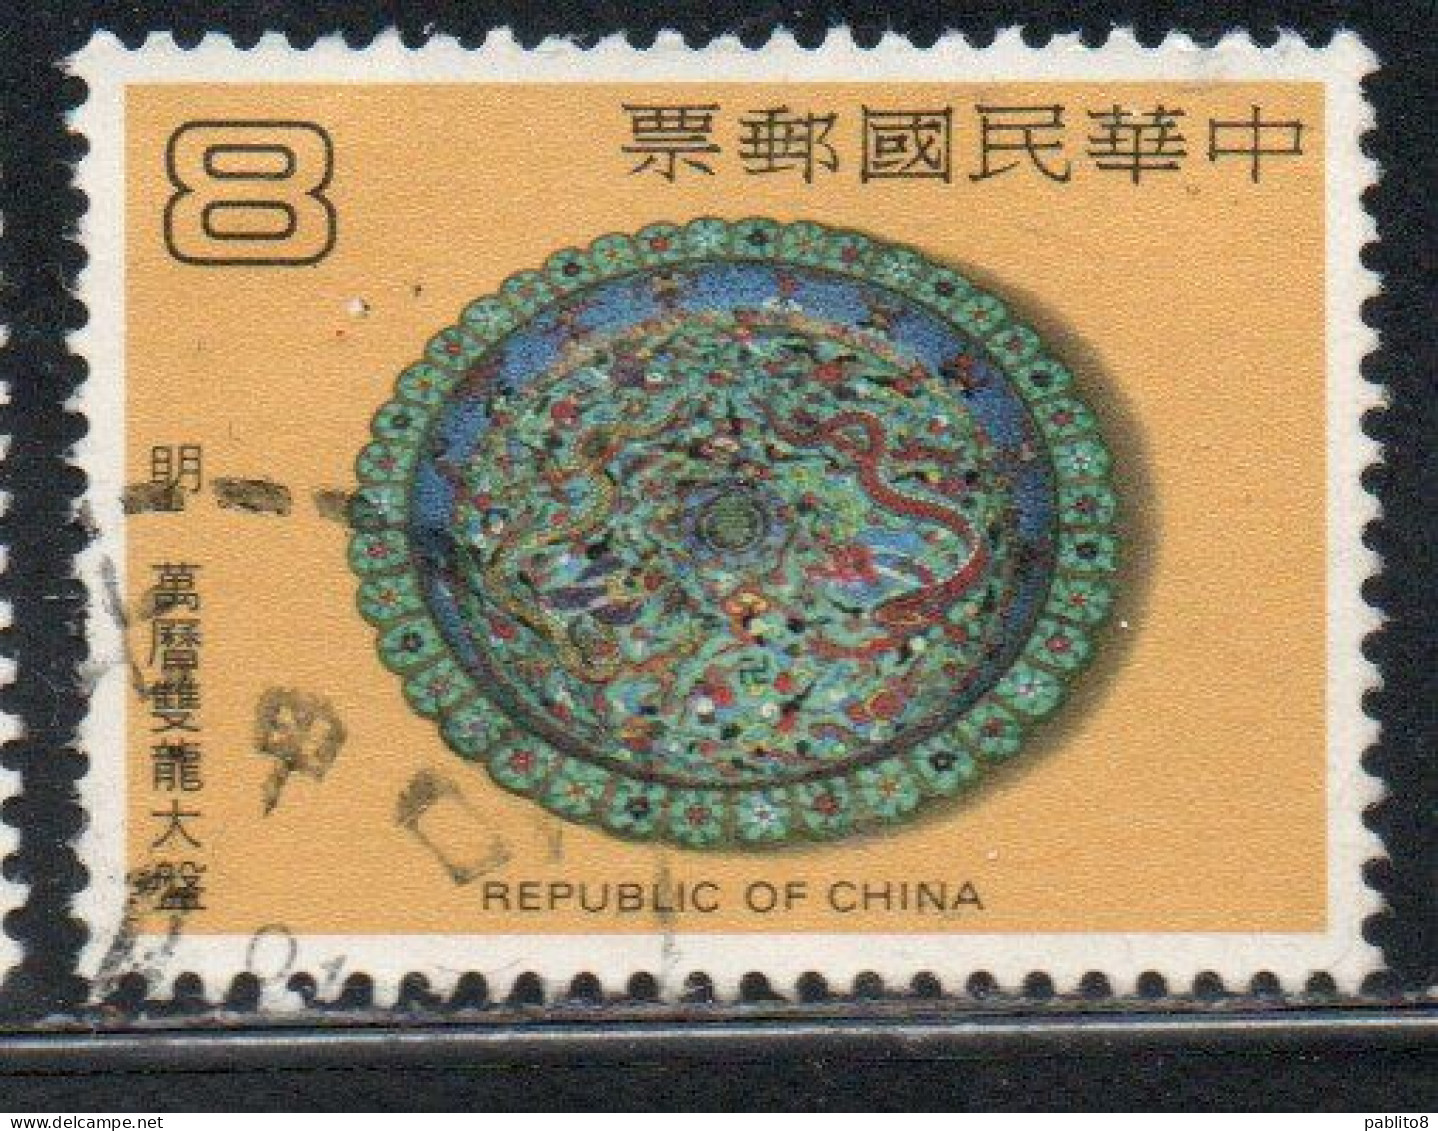 CHINA REPUBLIC CINA TAIWAN FORMOSA 1981 CLOISONNE ENAMEL PLATE 17th CENTURY 8$ USED USATO OBLITERE' - Used Stamps